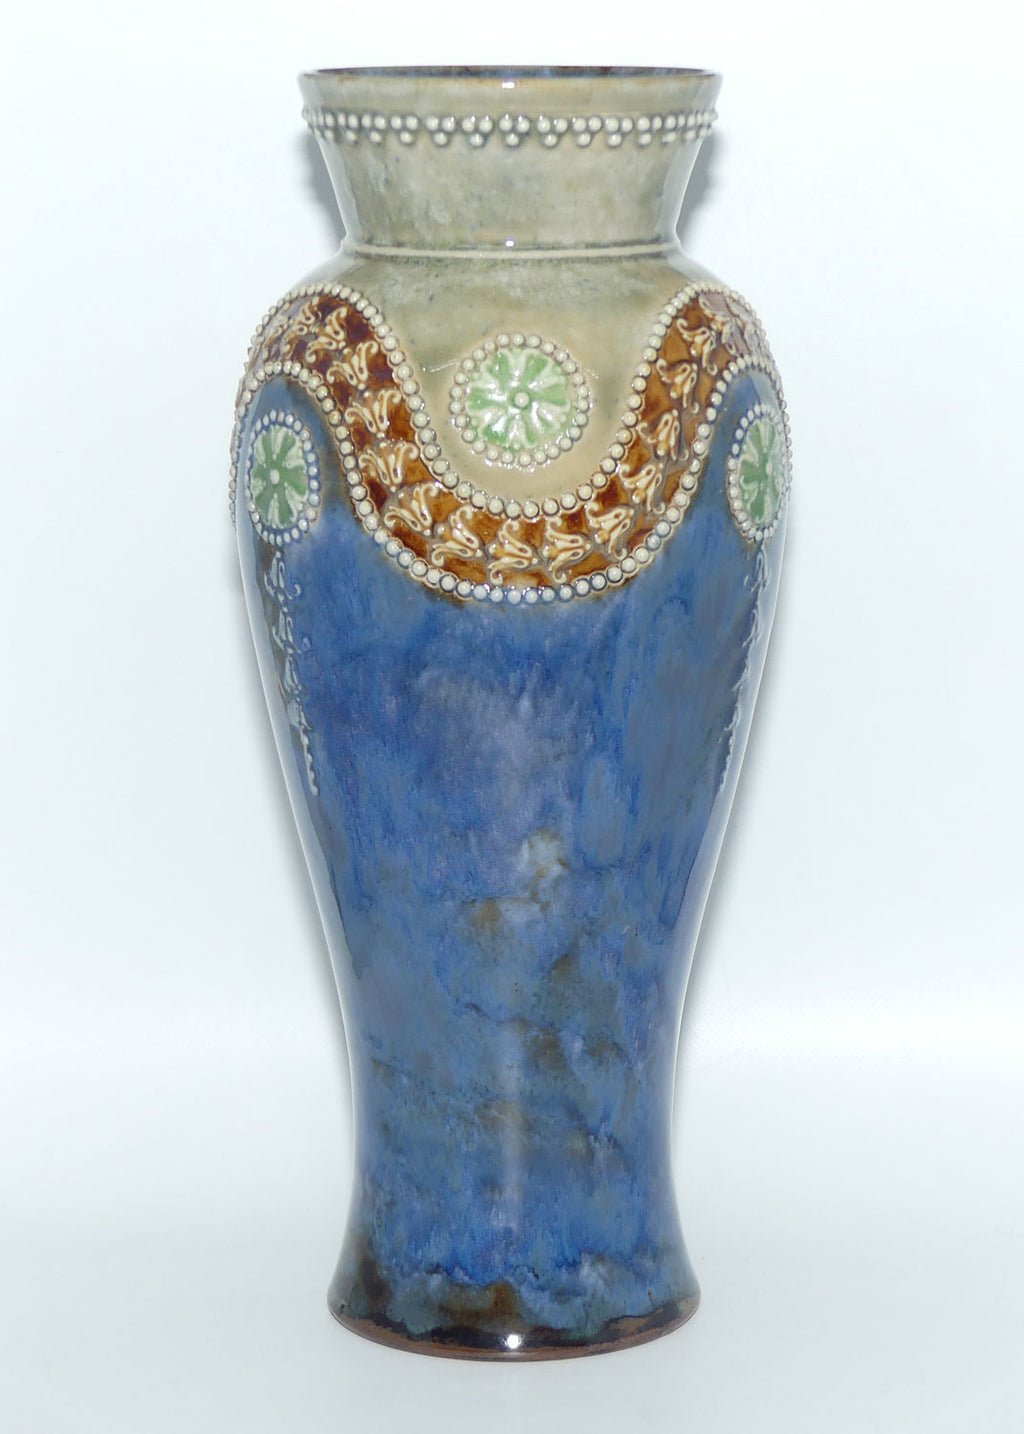 royal-doulton-stoneware-drip-glaze-vase-with-applied-beads-and-floral-decor-ethel-beard